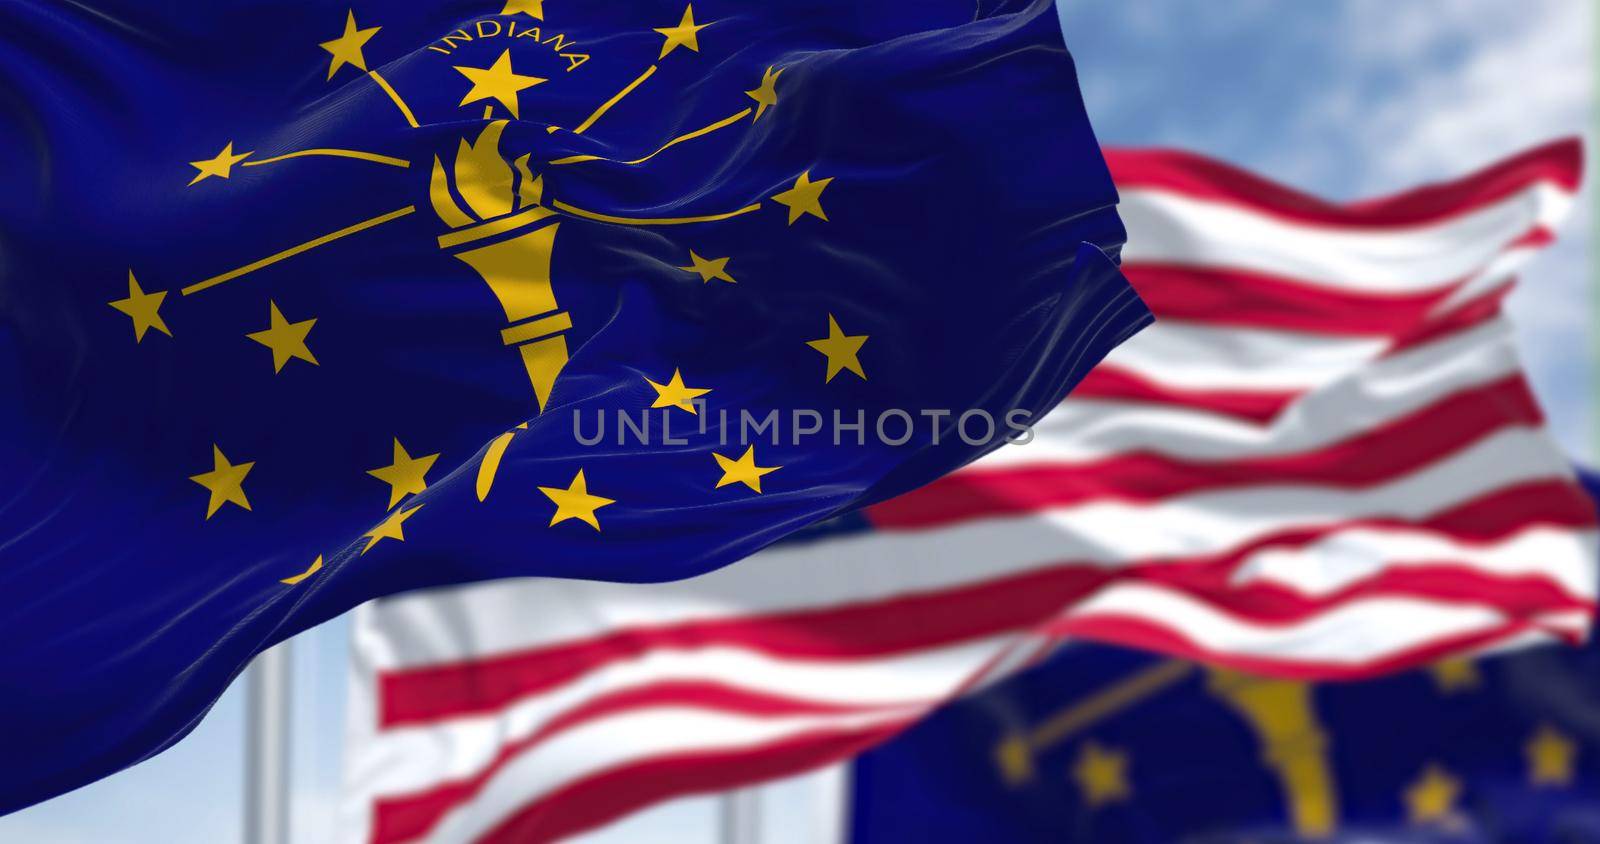 The Indiana state flag waving along with the national flag of the United States of America. In the background there is a clear sky. Indiana is a U.S. state in the Midwestern United States